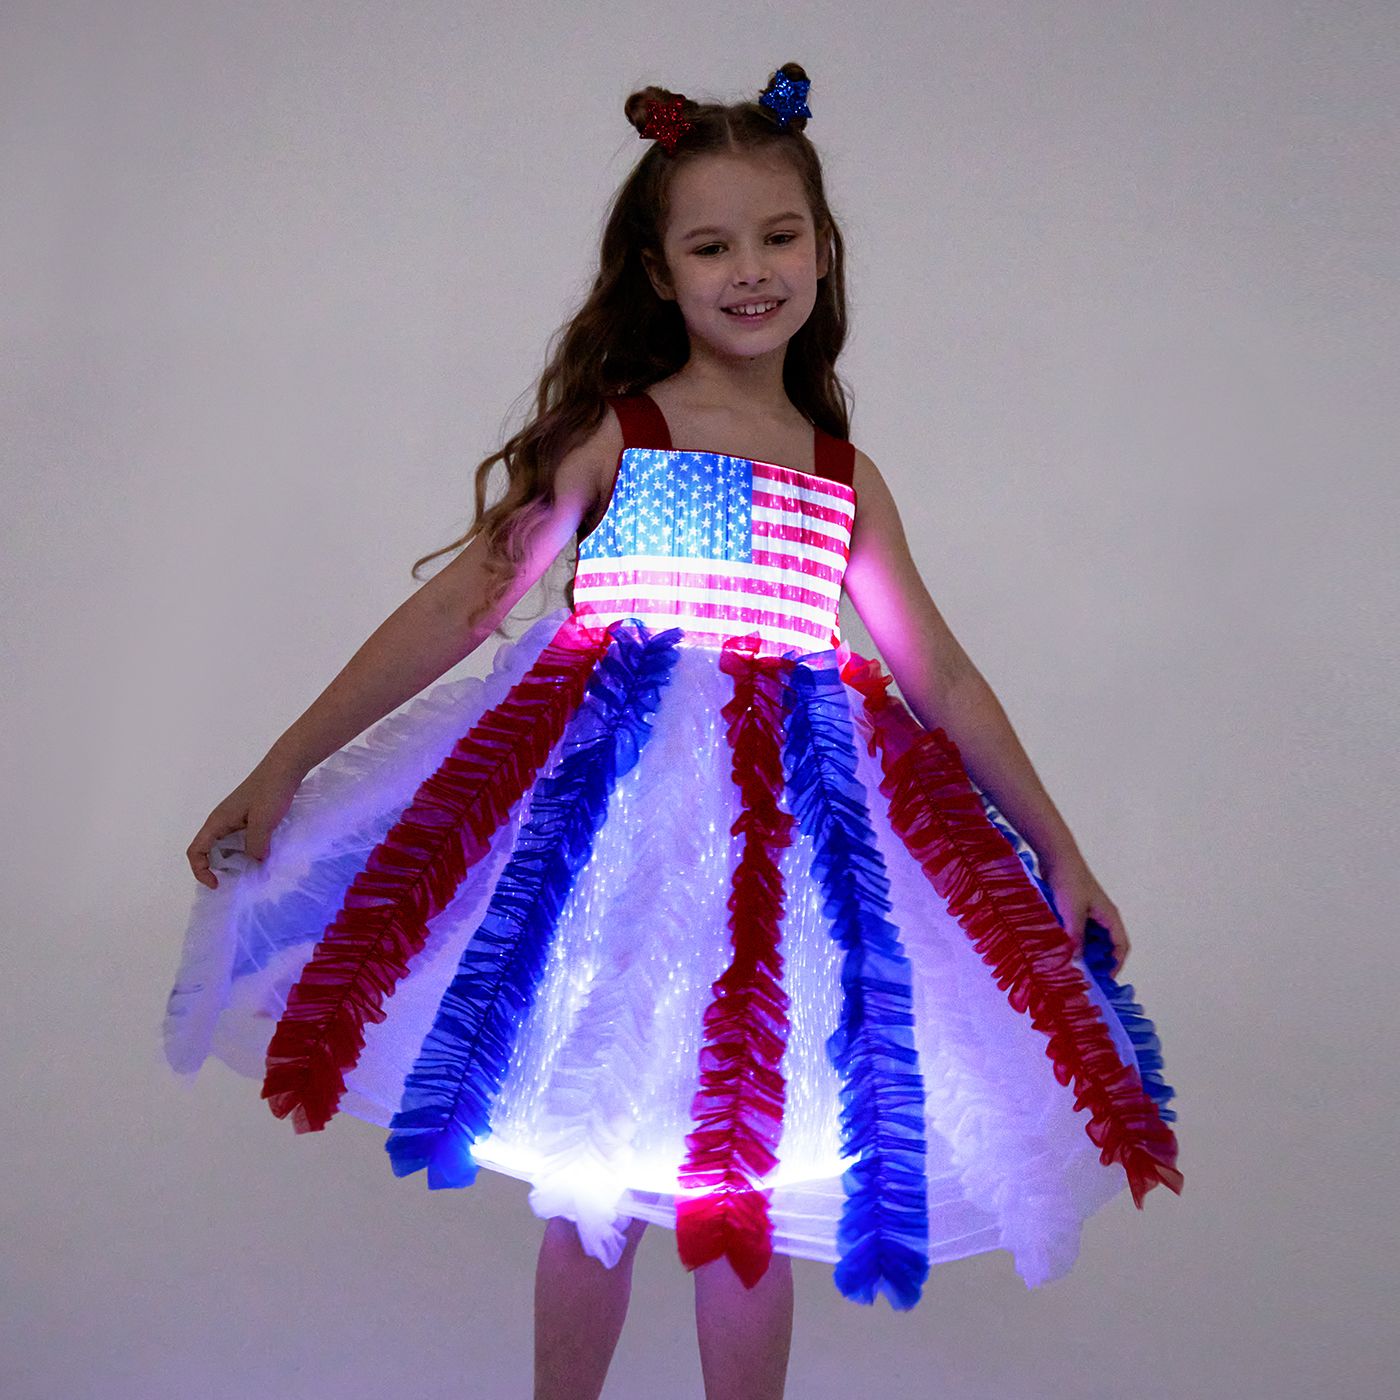 Go-Glow Light Up Princess Party Dress With Blue And Red Ruffled Skirt Including Controller (Battery Inside)